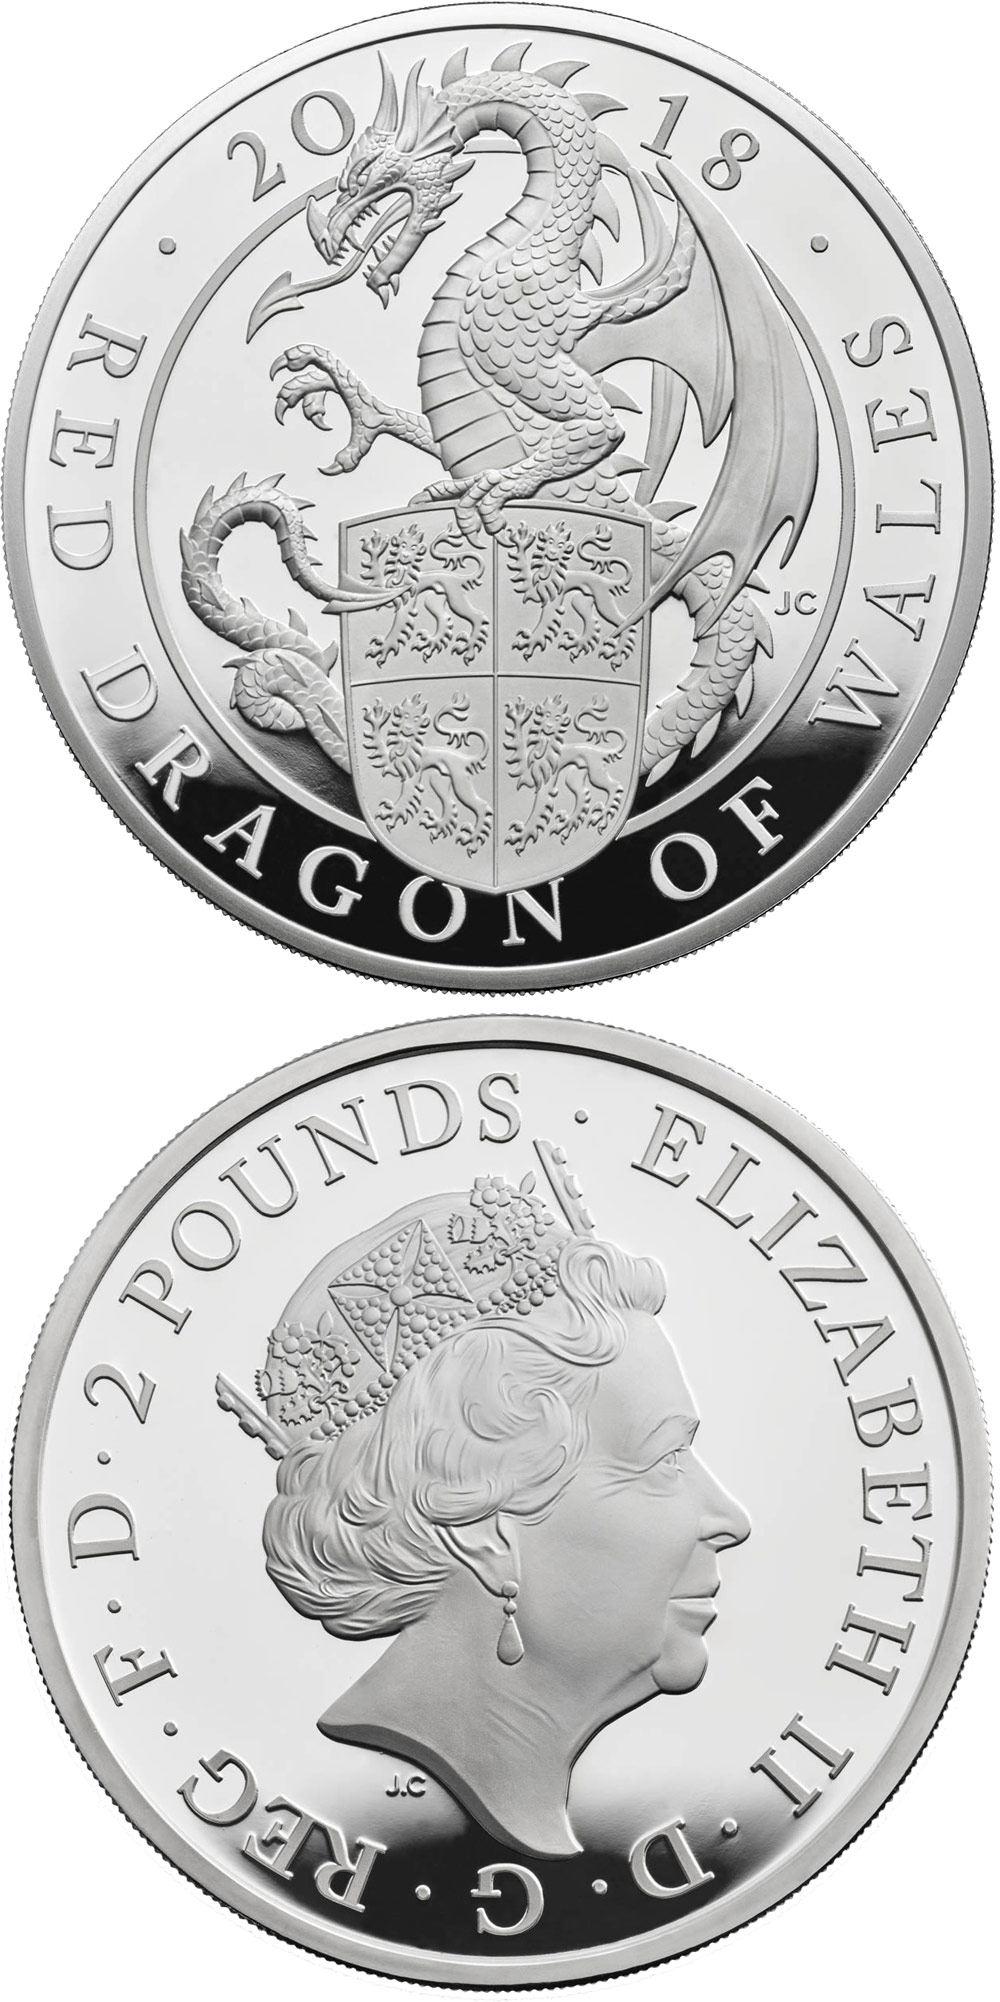 Image of 2 pounds coin - The Red Dragon of Wales | United Kingdom 2018.  The Silver coin is of Proof quality.